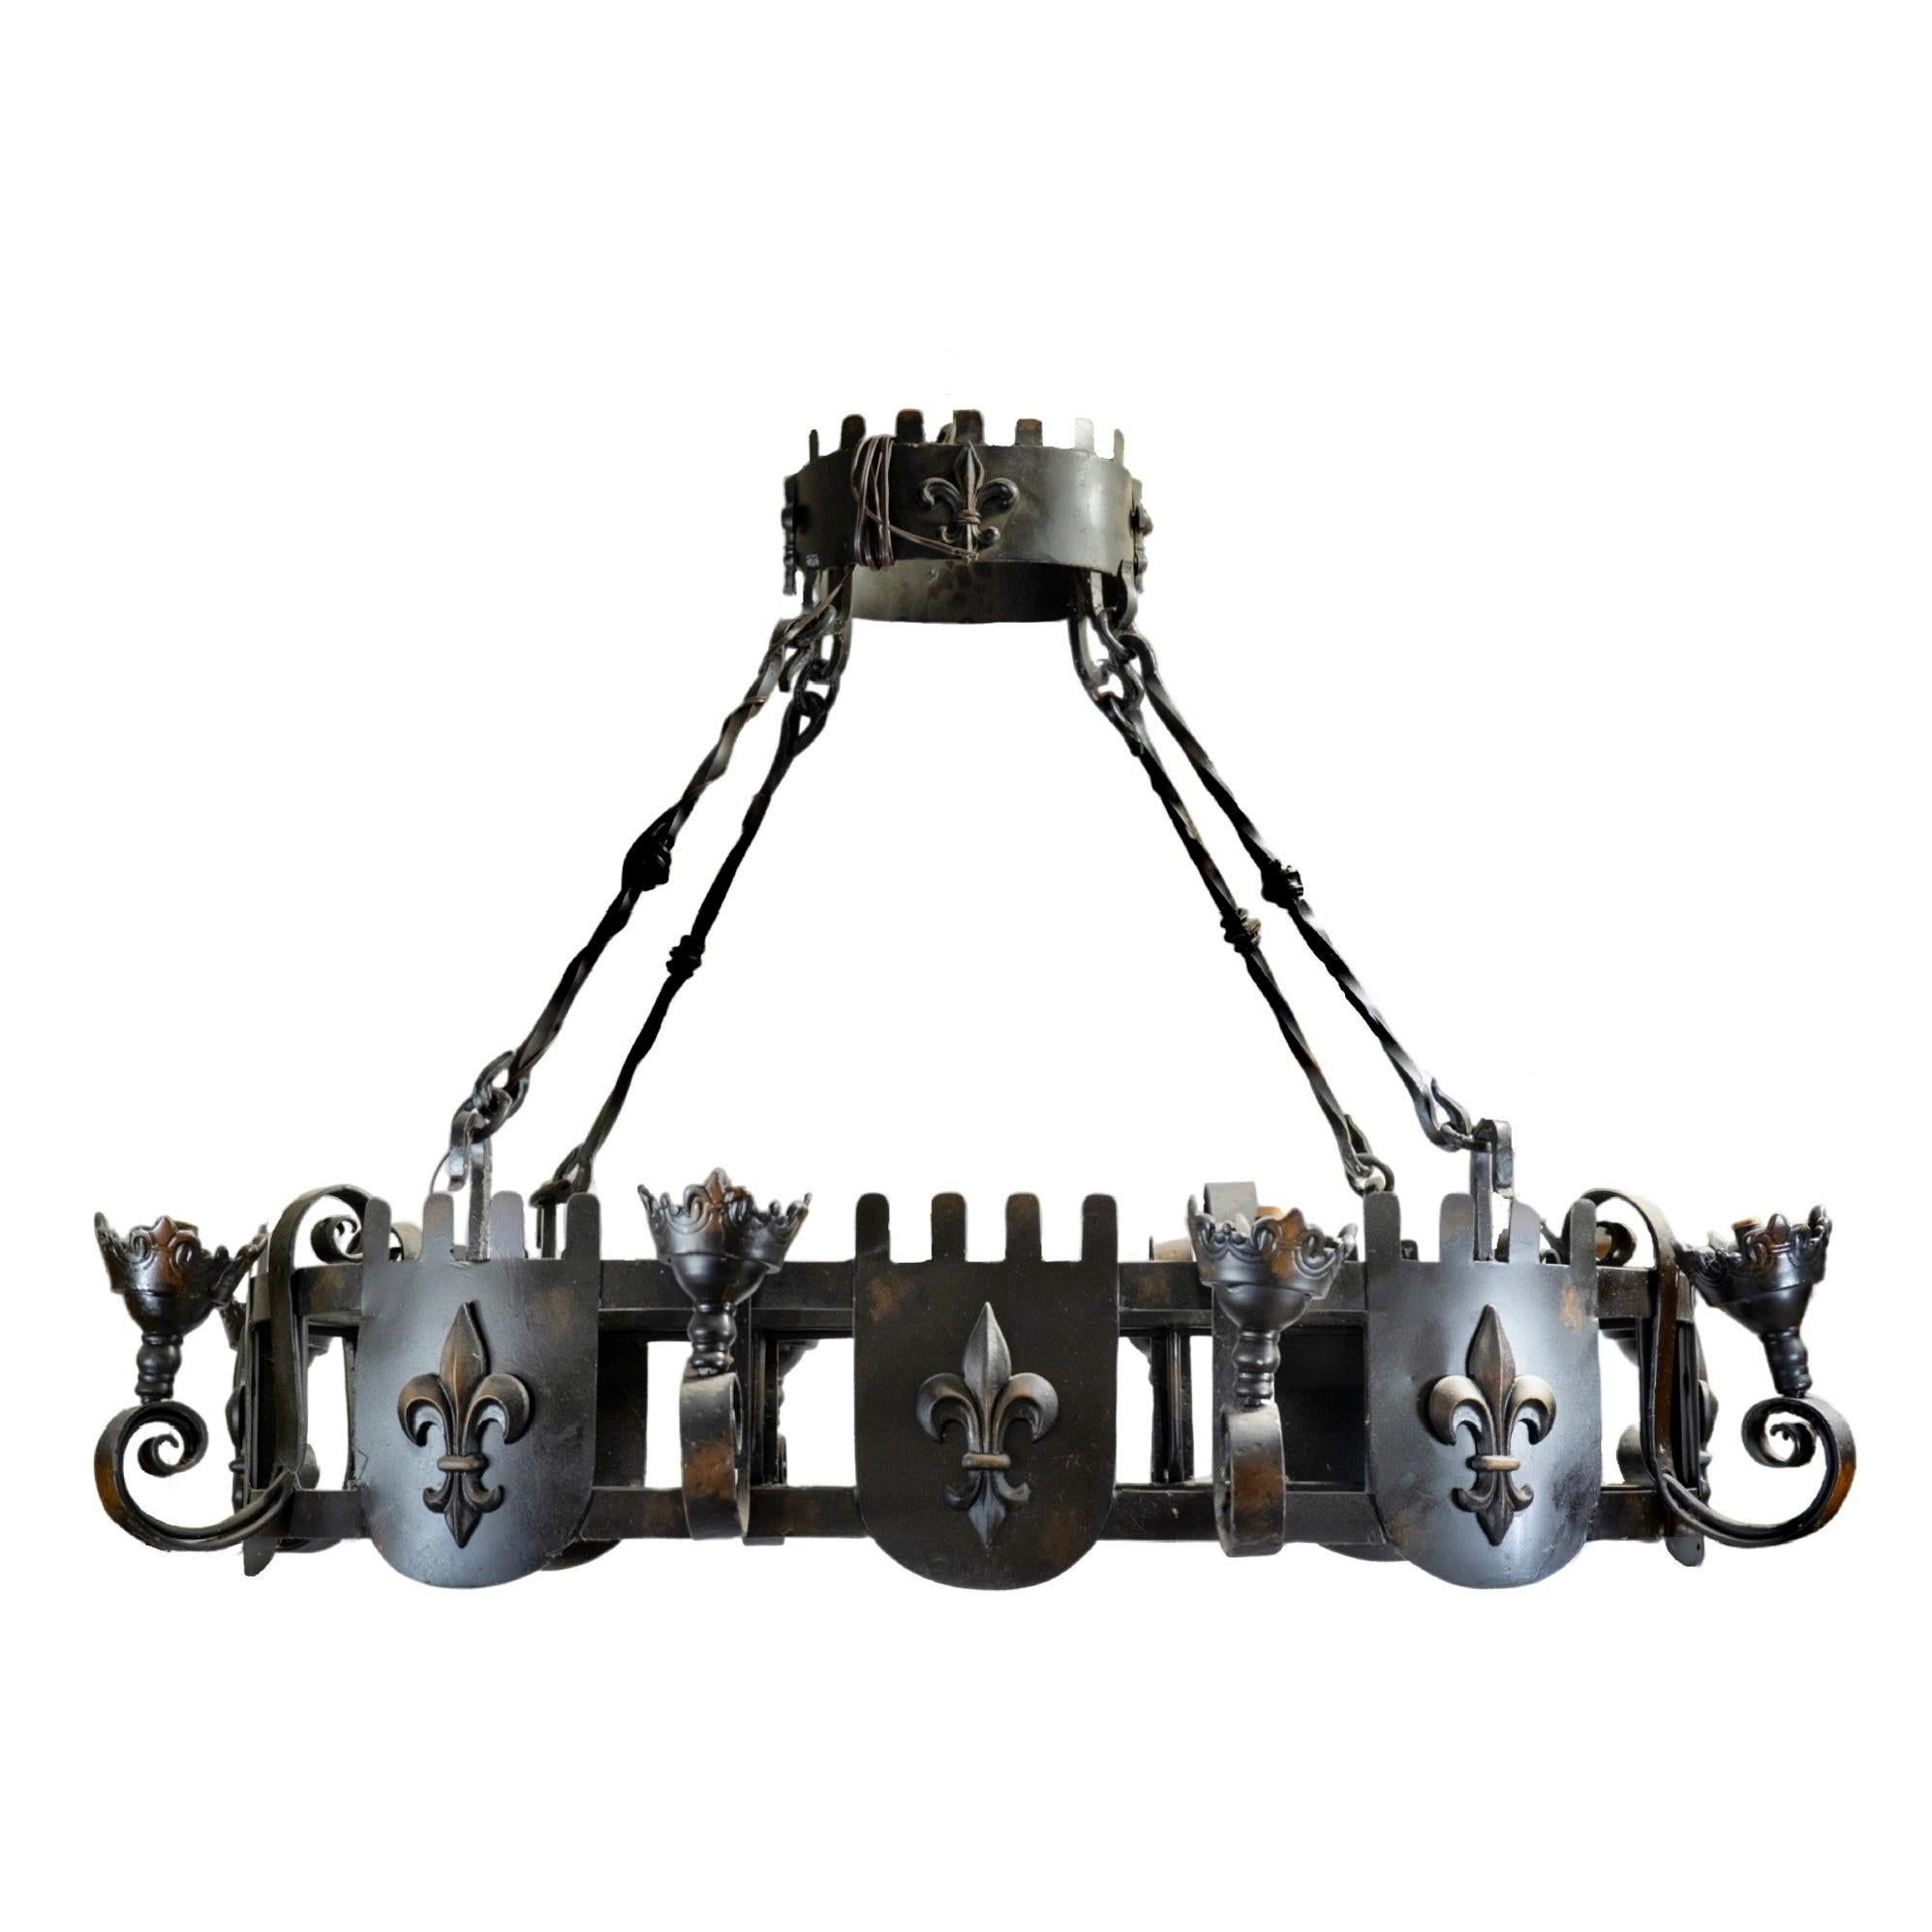 Enhance any room with our exquisite French Iron Chandelier. Crafted in France during the 1980s, this chandelier features intricate ironwork and iconic fleur de lis symbols. With a hardwired installation and an elegant design, it is perfect for